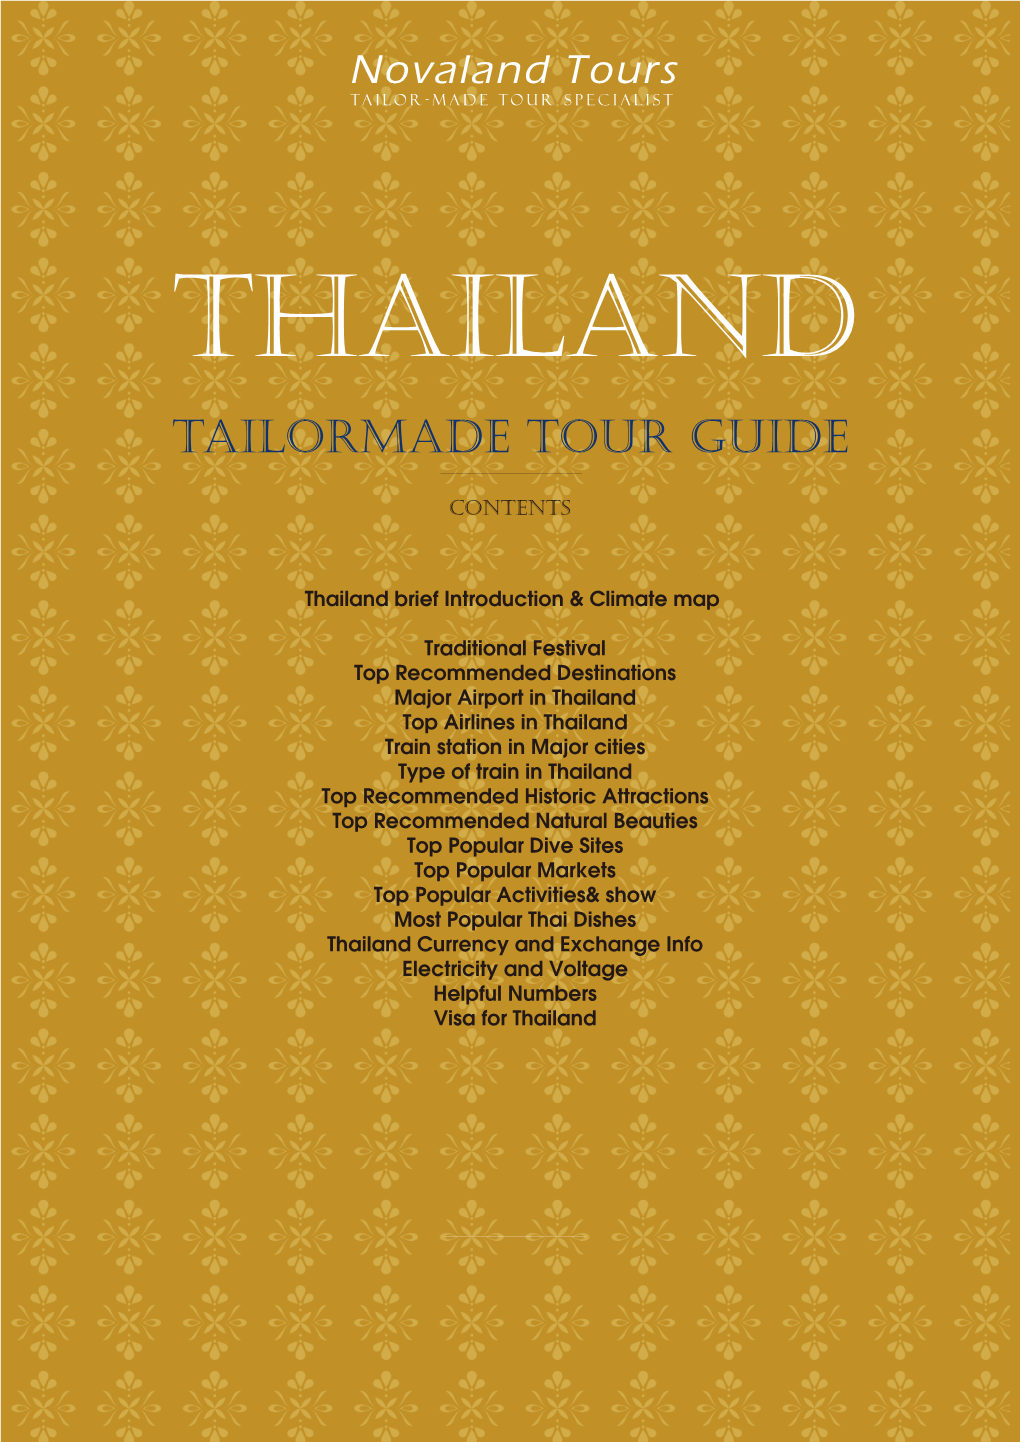 Thailand Tailormade Tour Guide